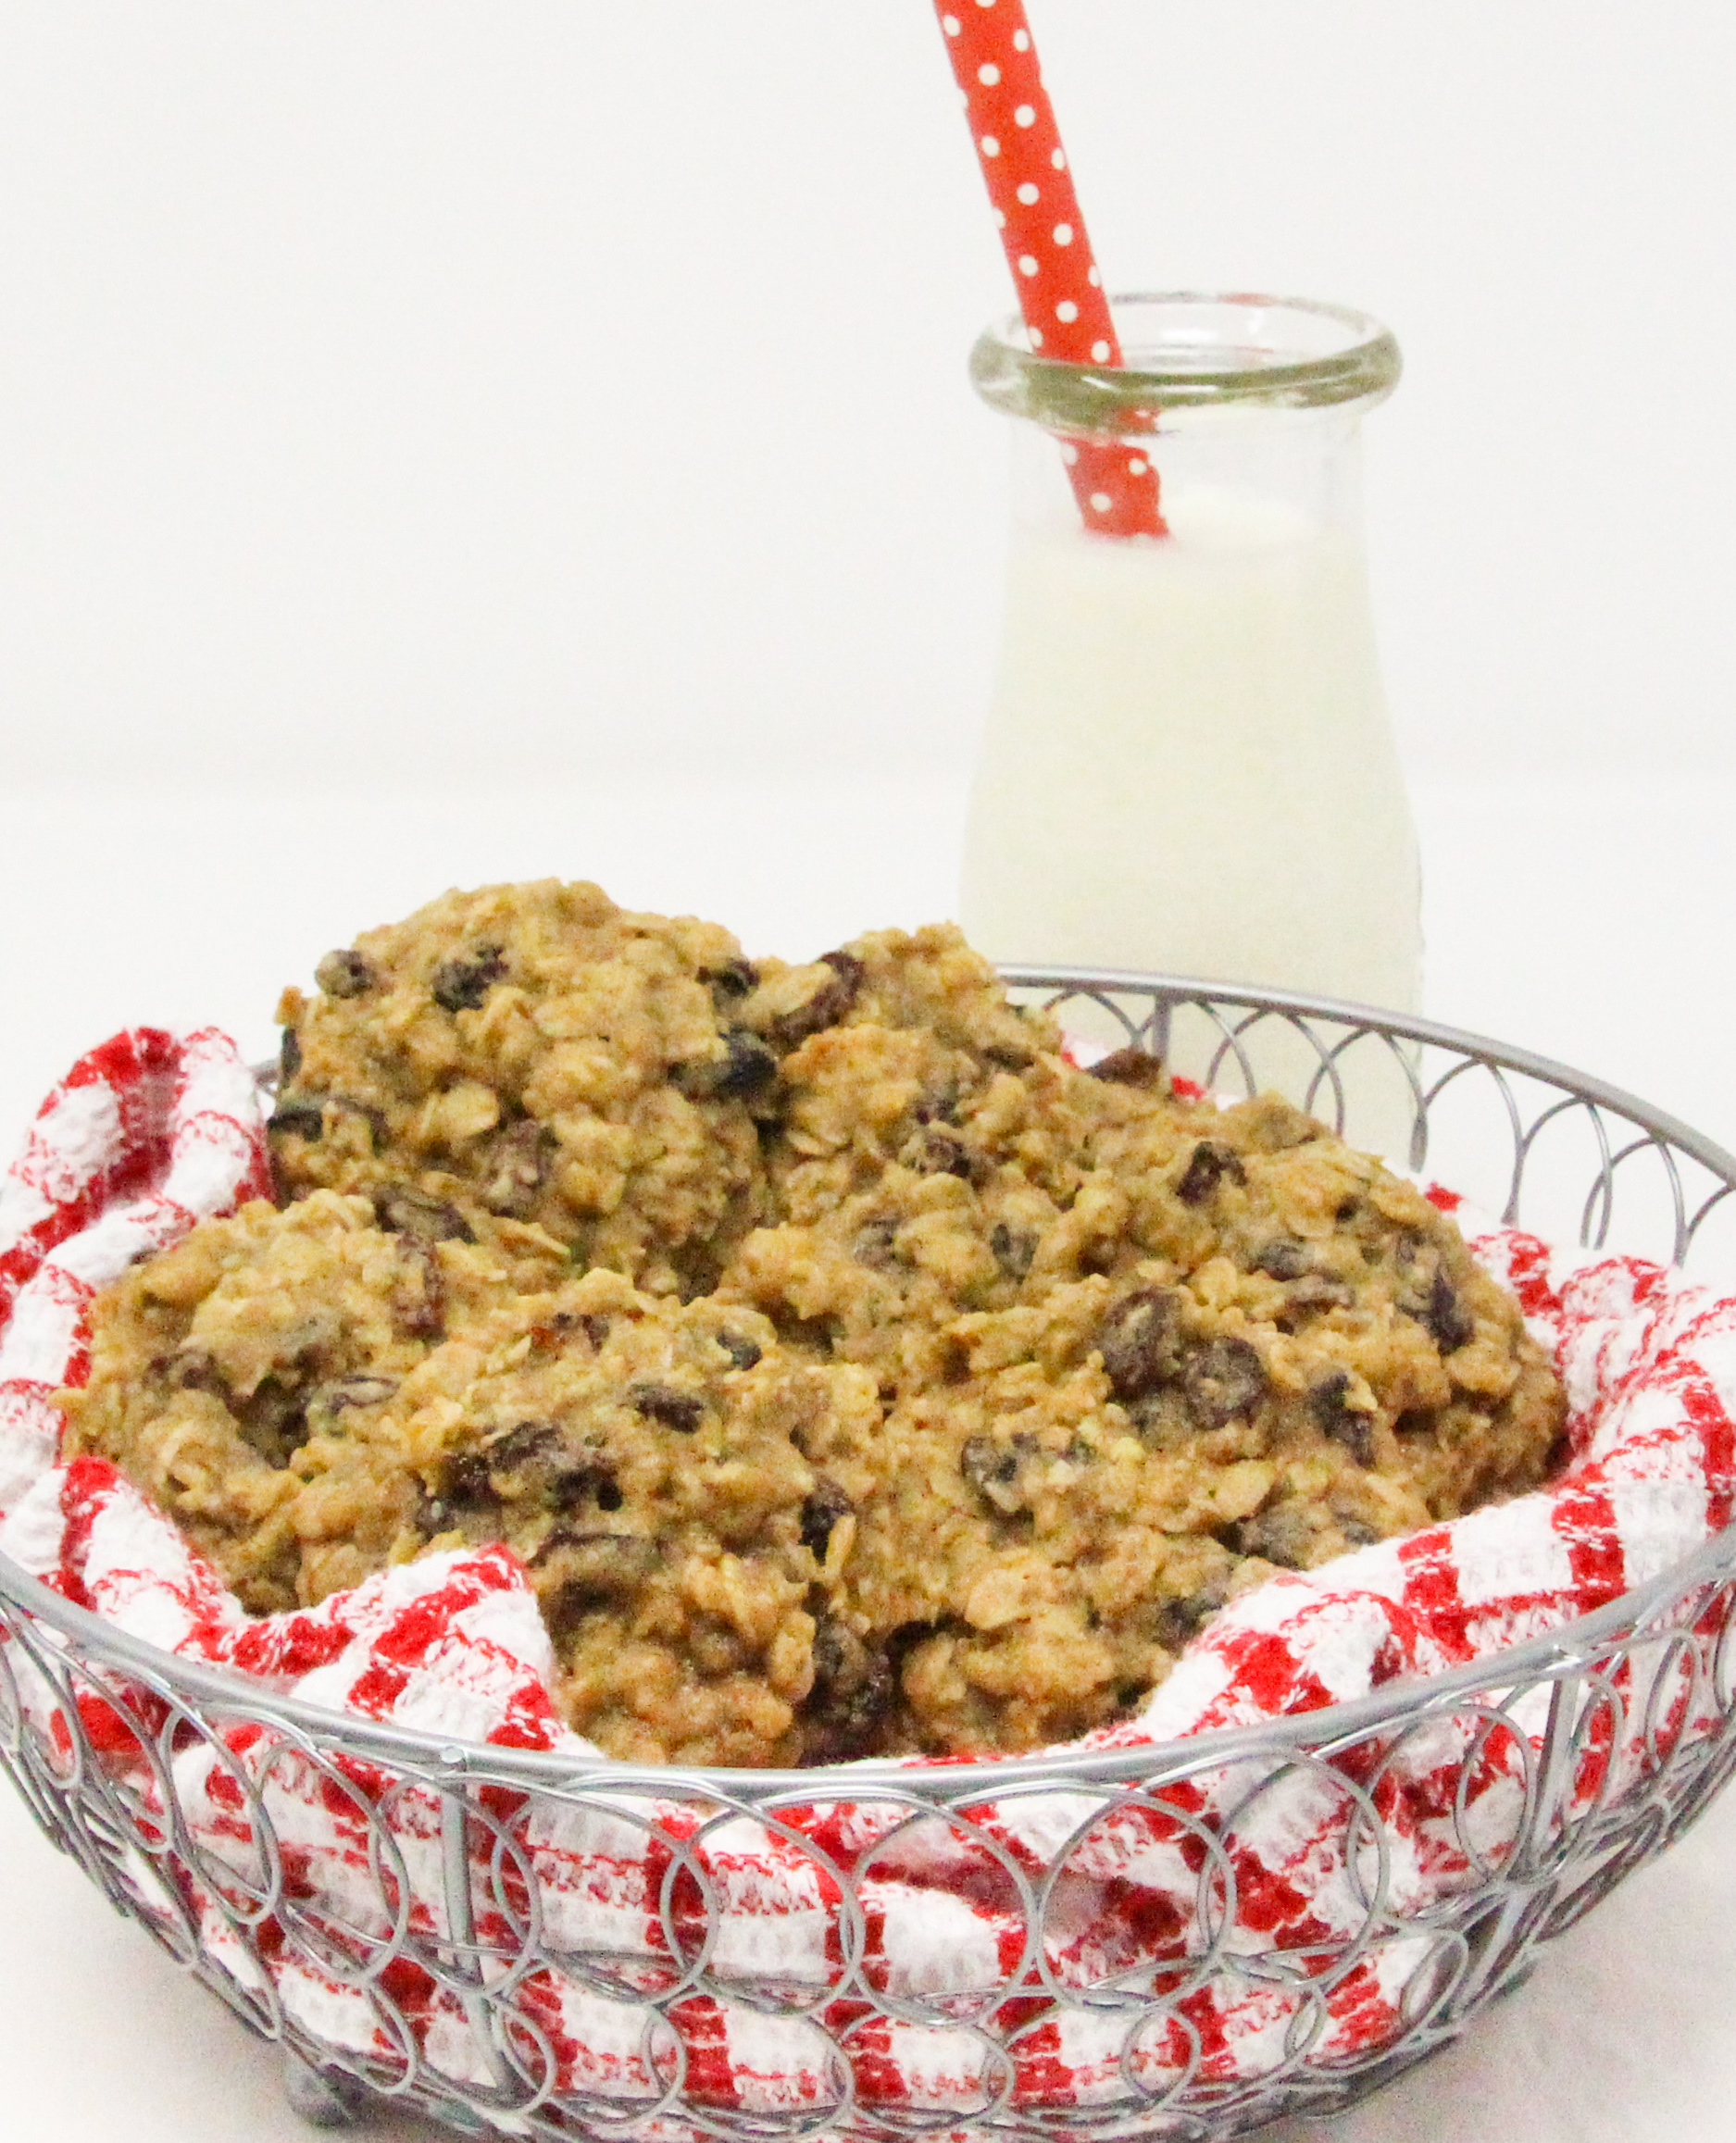 These classic Oatmeal Raisin cookies are soft and chewy and filled with just the right amount of raisins. And, they're the perfect pick-me-up treat for late morning or after-school snacks. Recipe shared with permission granted by Debra Sennefelder, author of HOW THE MURDER CRUMBLES. 